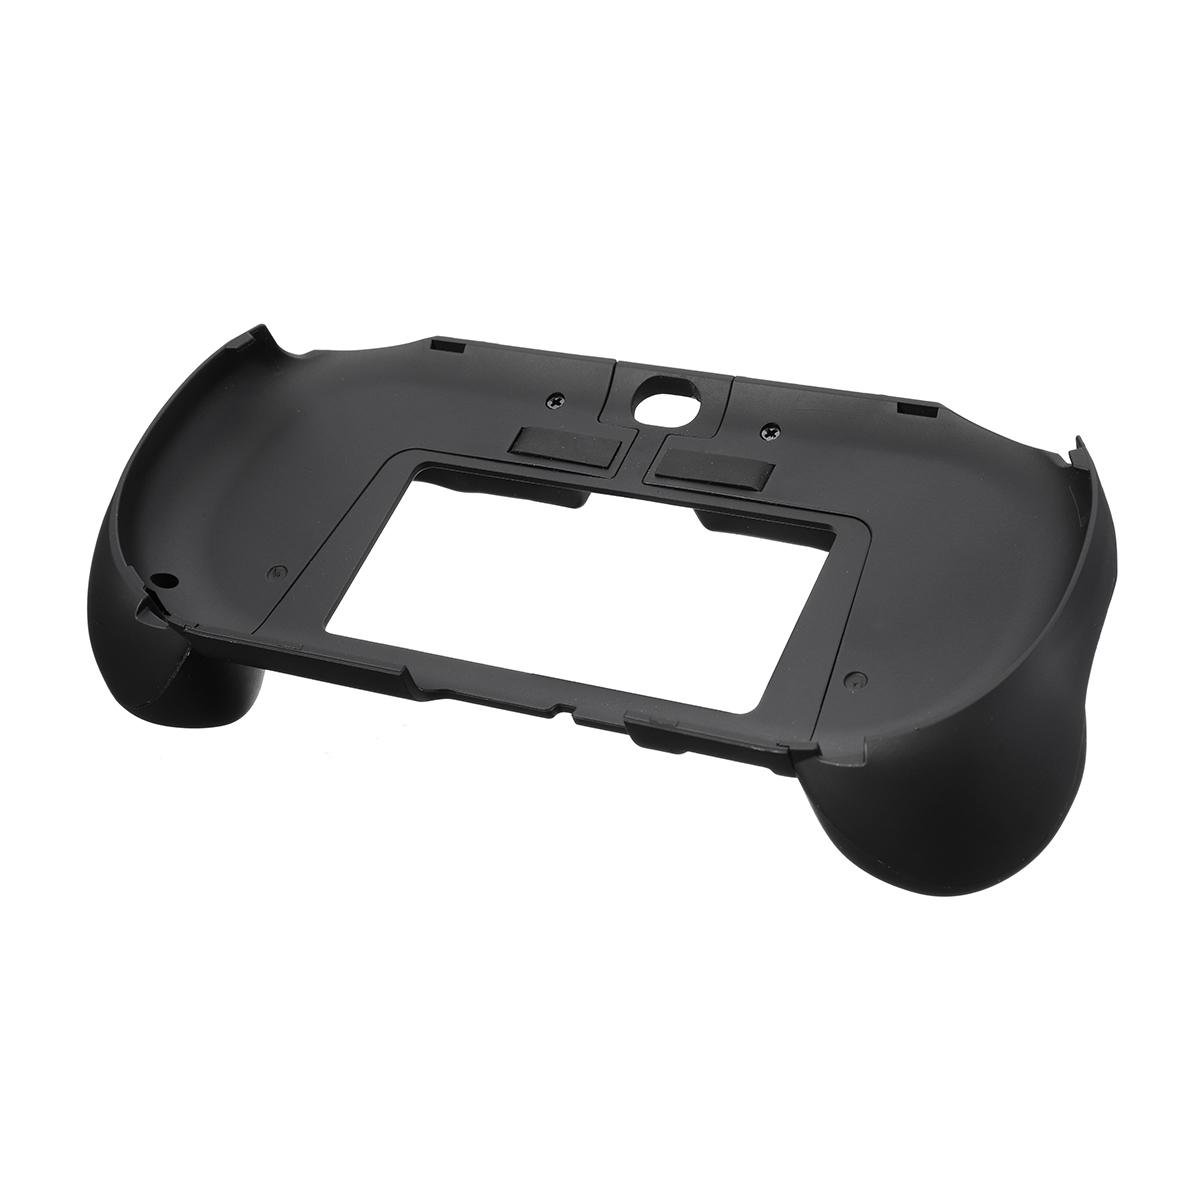 L2 R2 Trigger Grips Handle Shell Protective Case for Sony PlayStation PS Vita 2000 Game Console 15